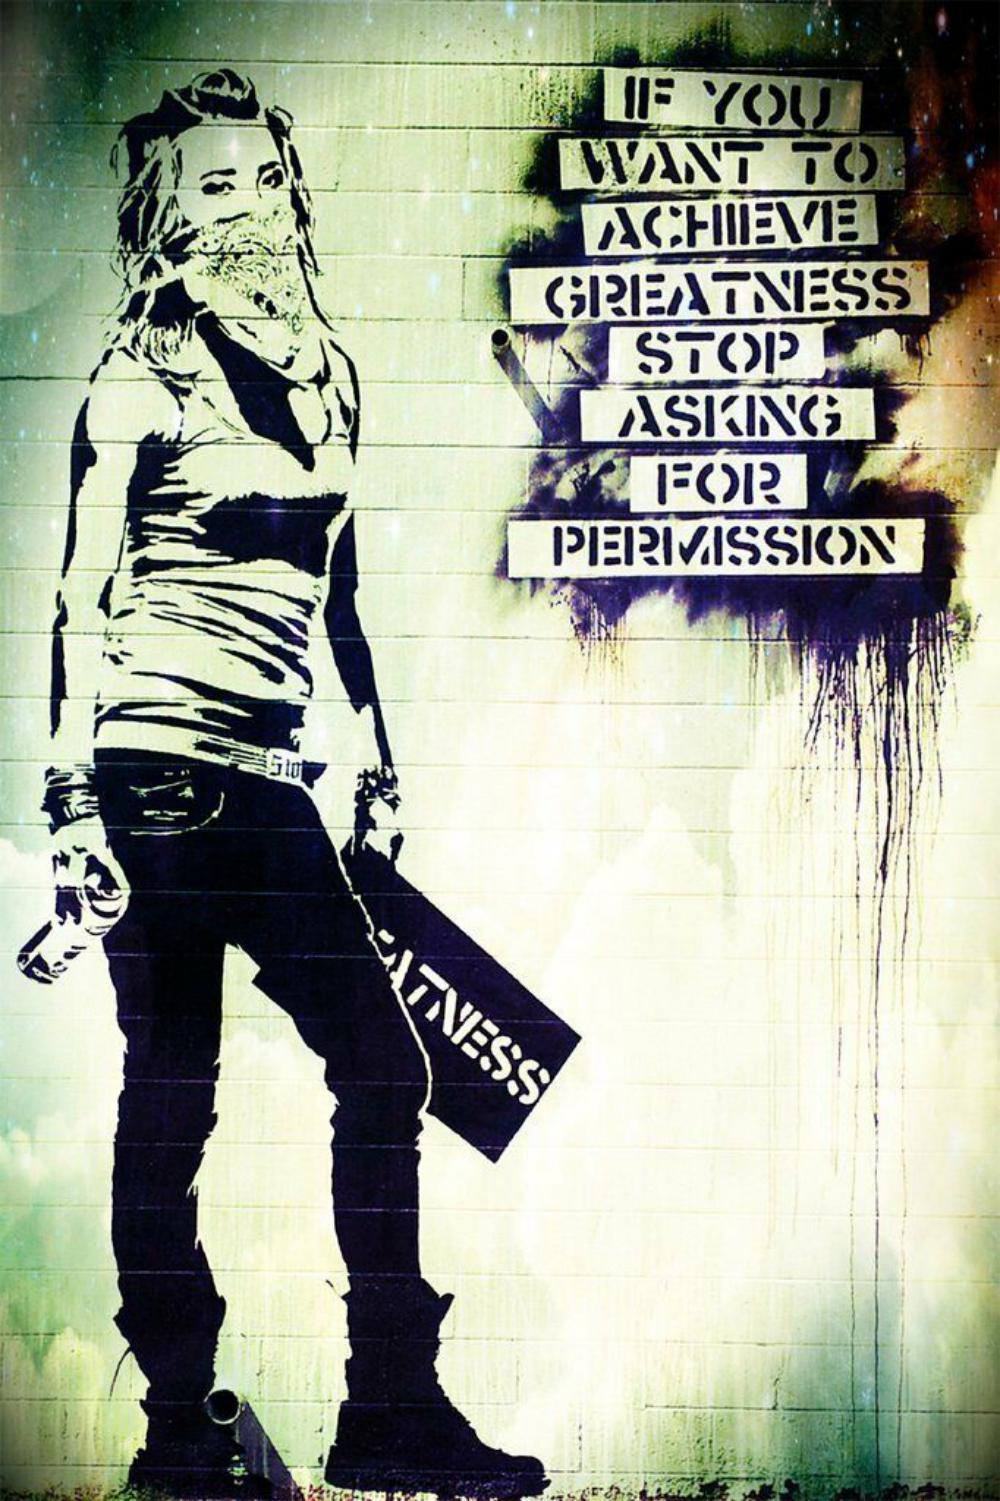 Banksy, Achieve Greatness, Offset lithograph